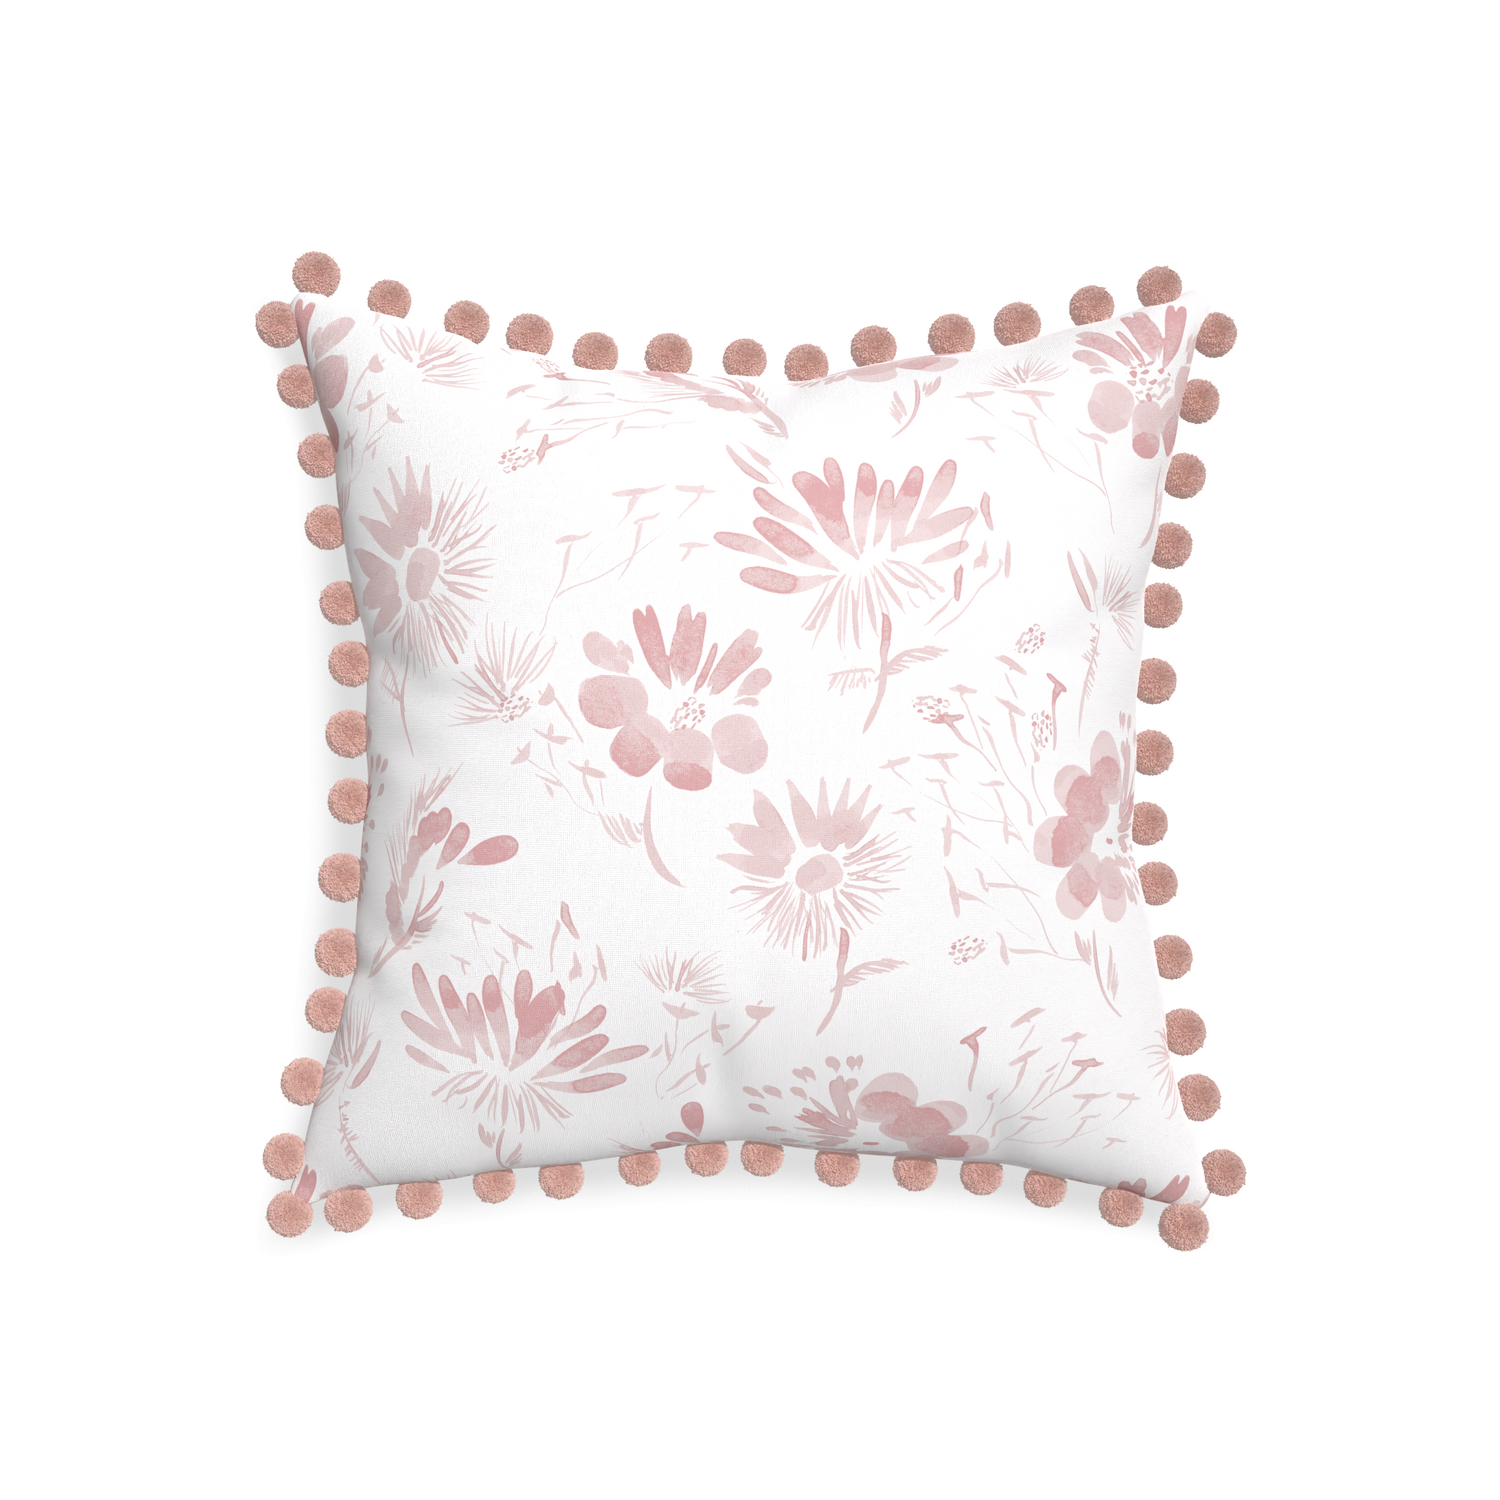 20-square blake custom pink floralpillow with rose pom pom on white background